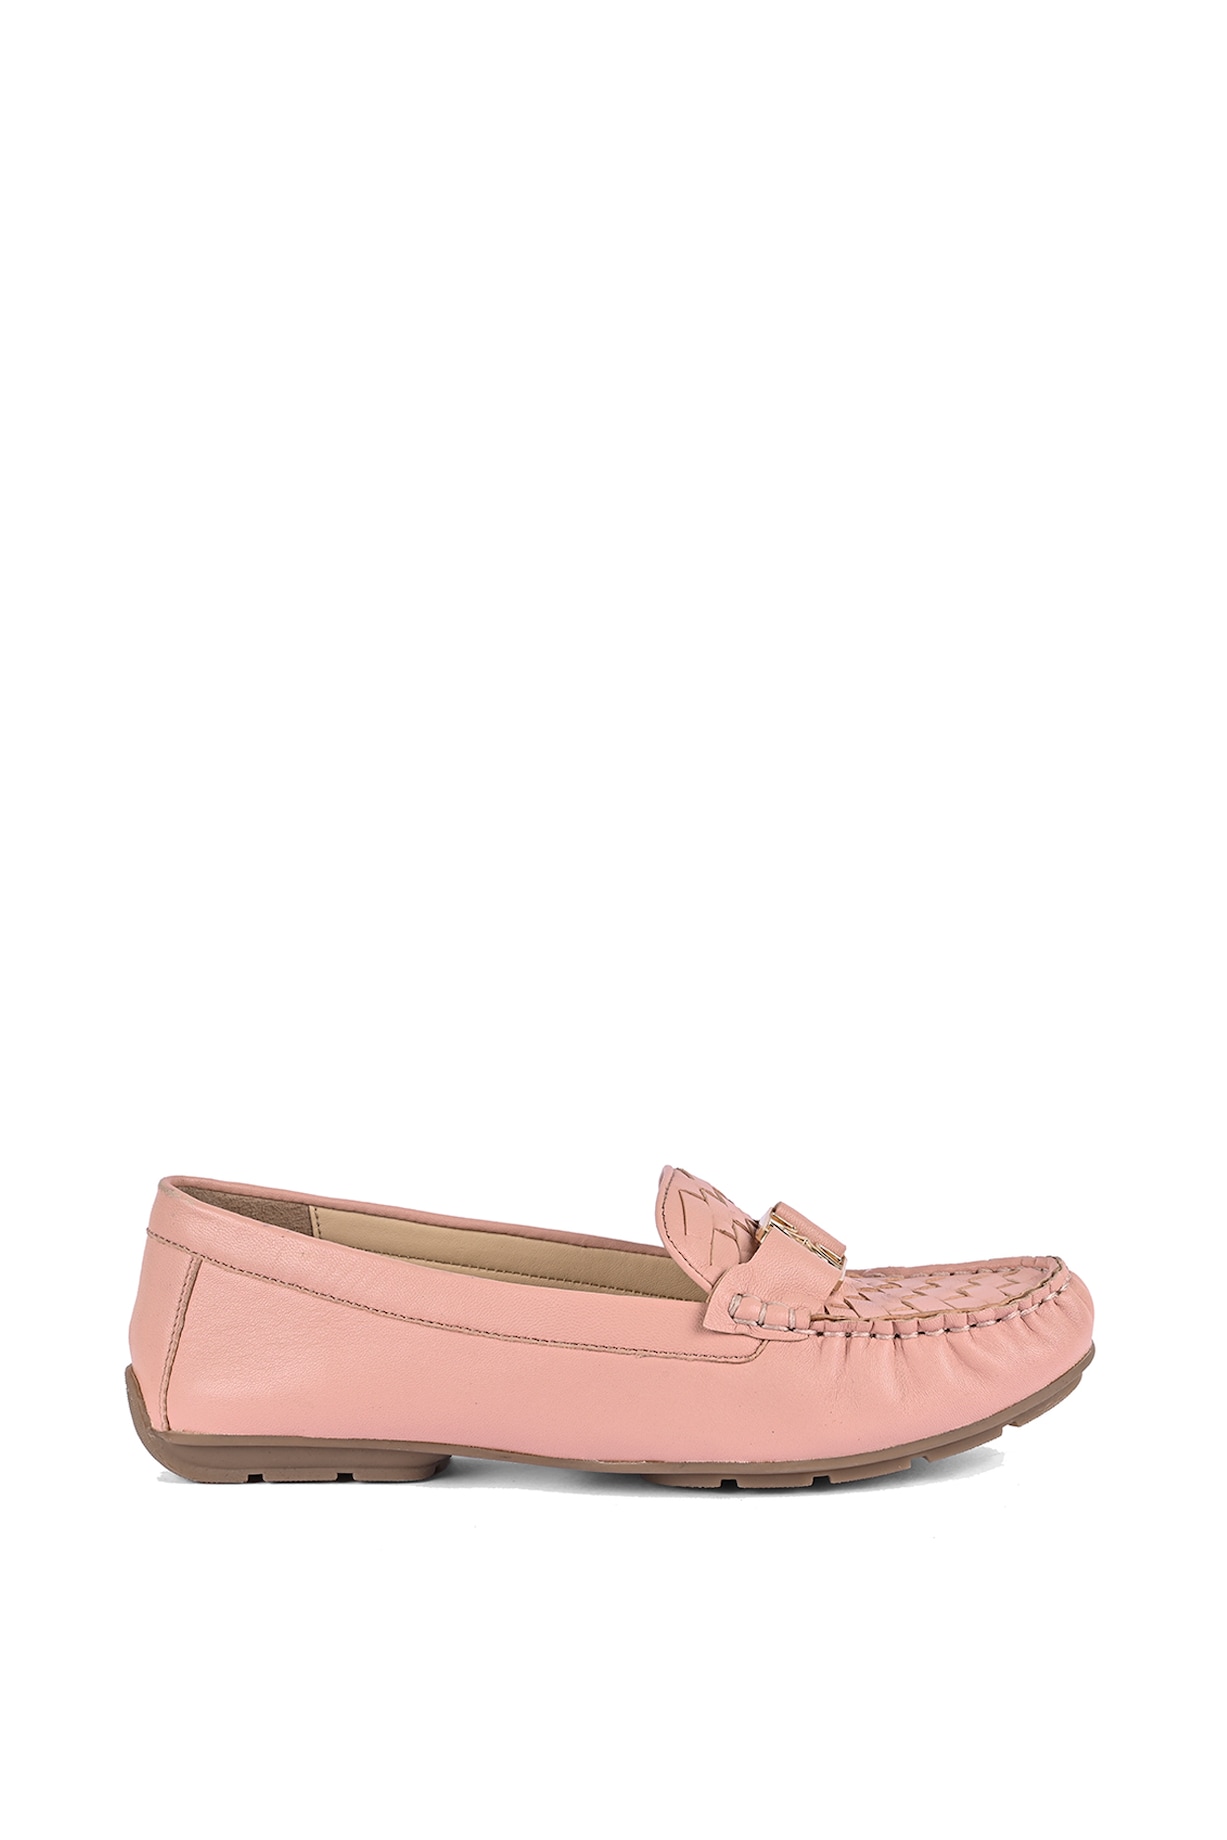 Pink Leather Moccasin Shoes Design by VANILLA MOON at Pernia's Pop Up Shop  2023